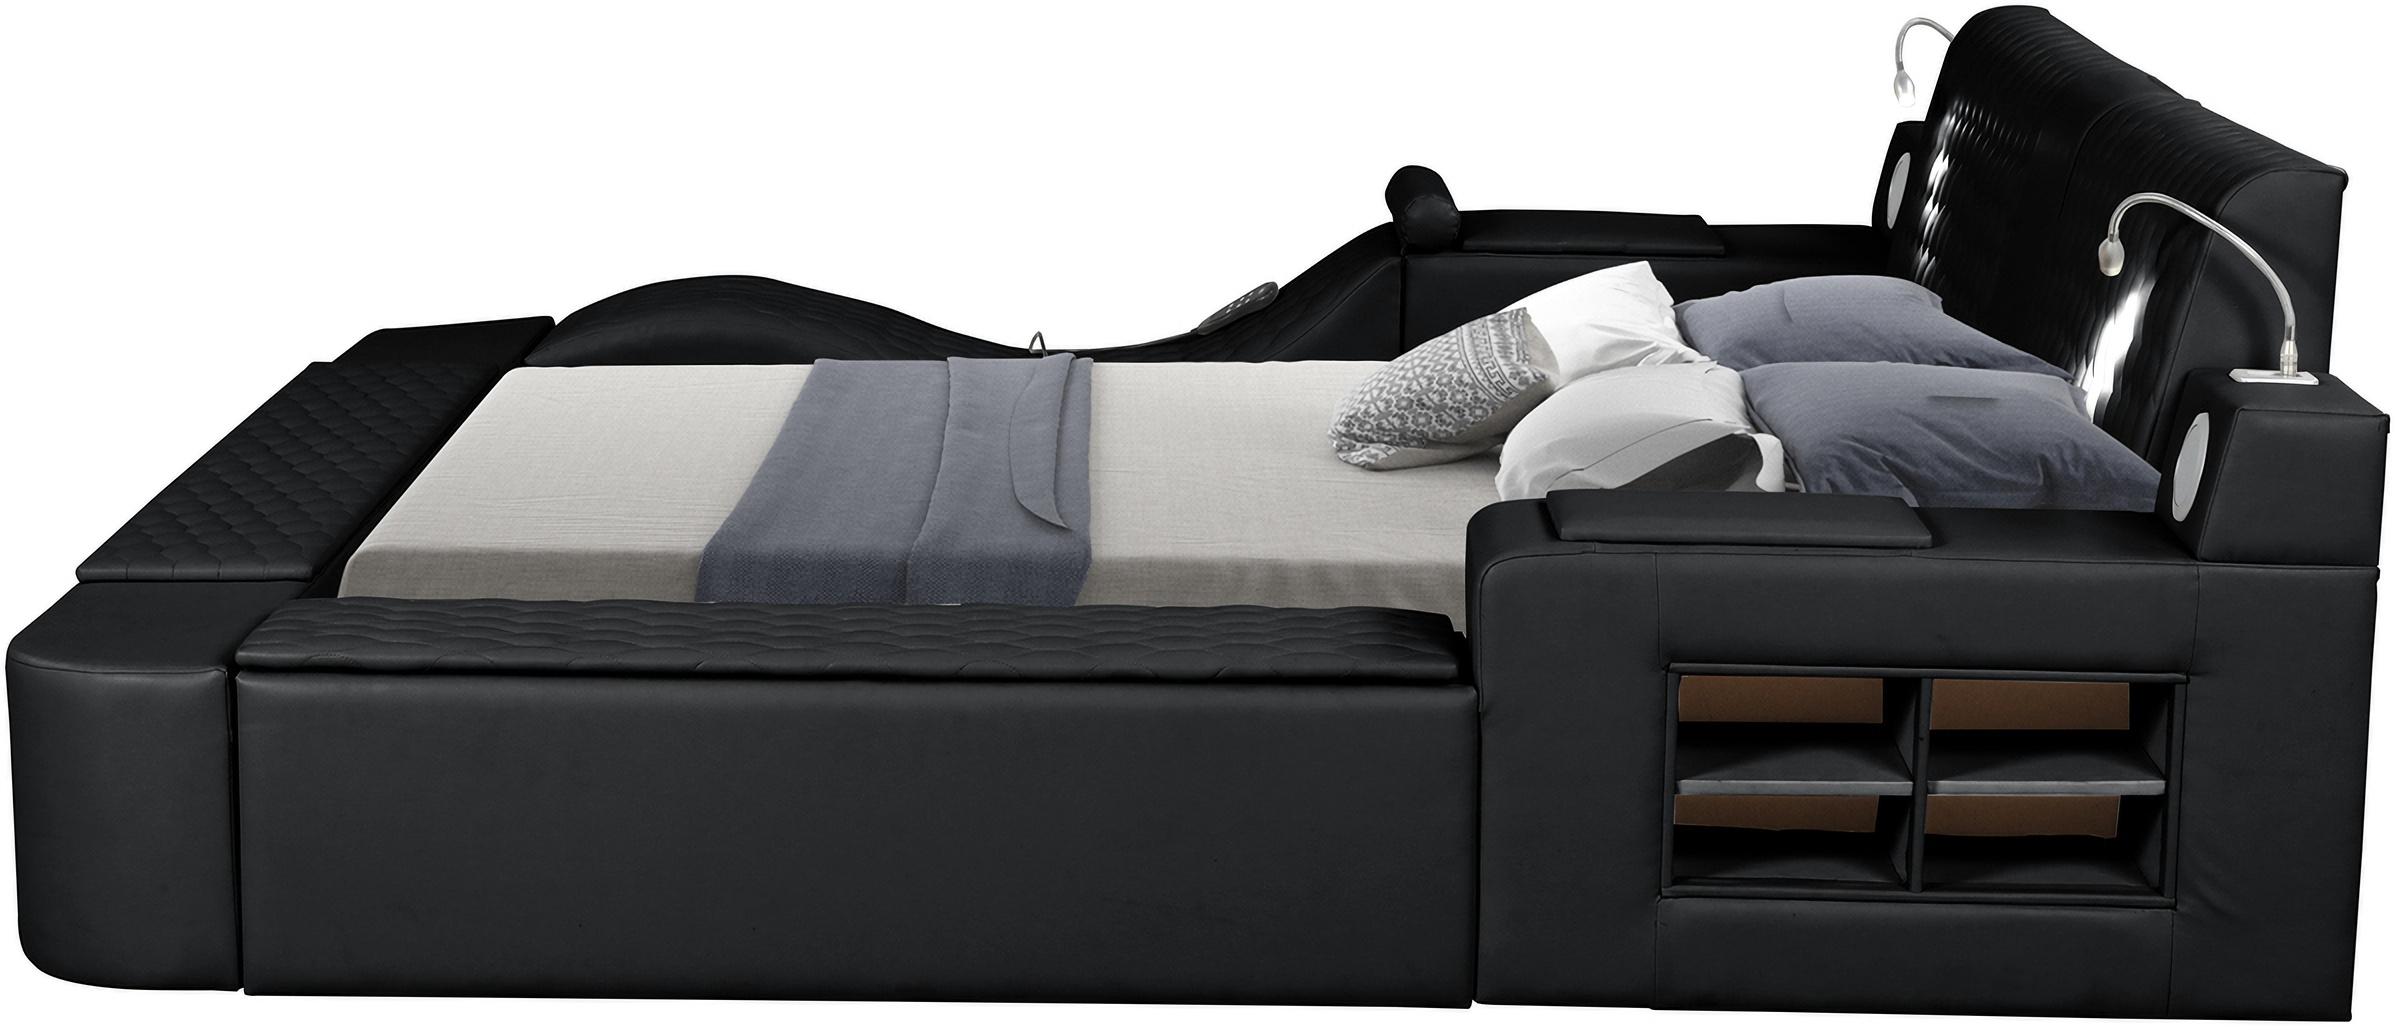 

    
ZOYA-BK-Q Black Eco Leather Smart Multifunctional Queen Bed ZOYA Galaxy Home Contemporary
